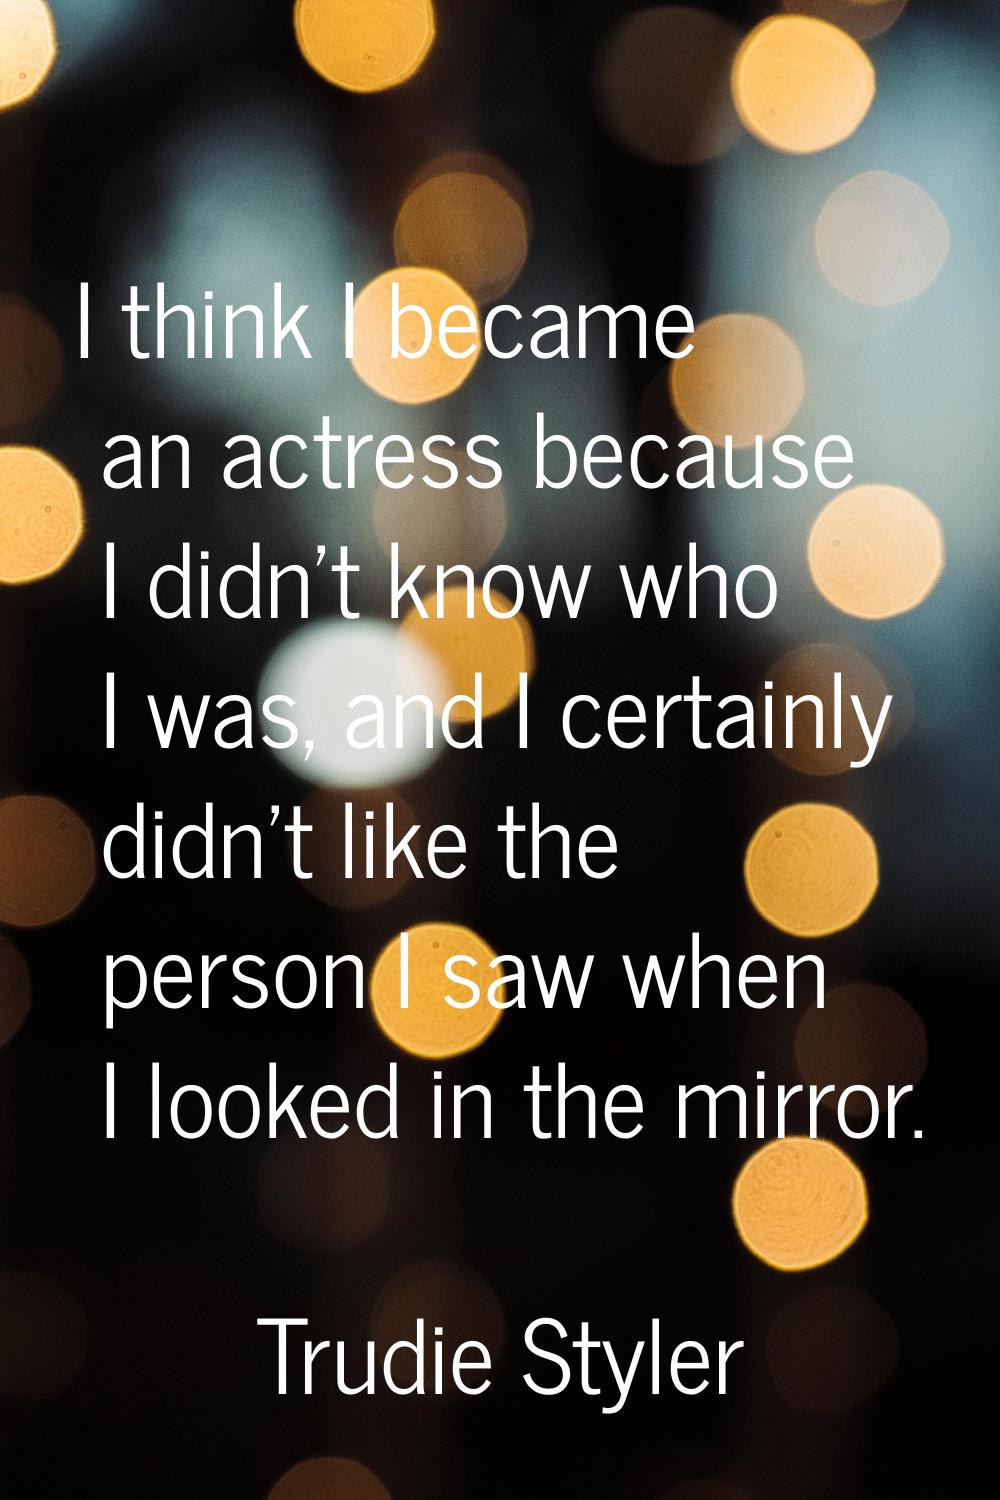 I think I became an actress because I didn't know who I was, and I certainly didn't like the person